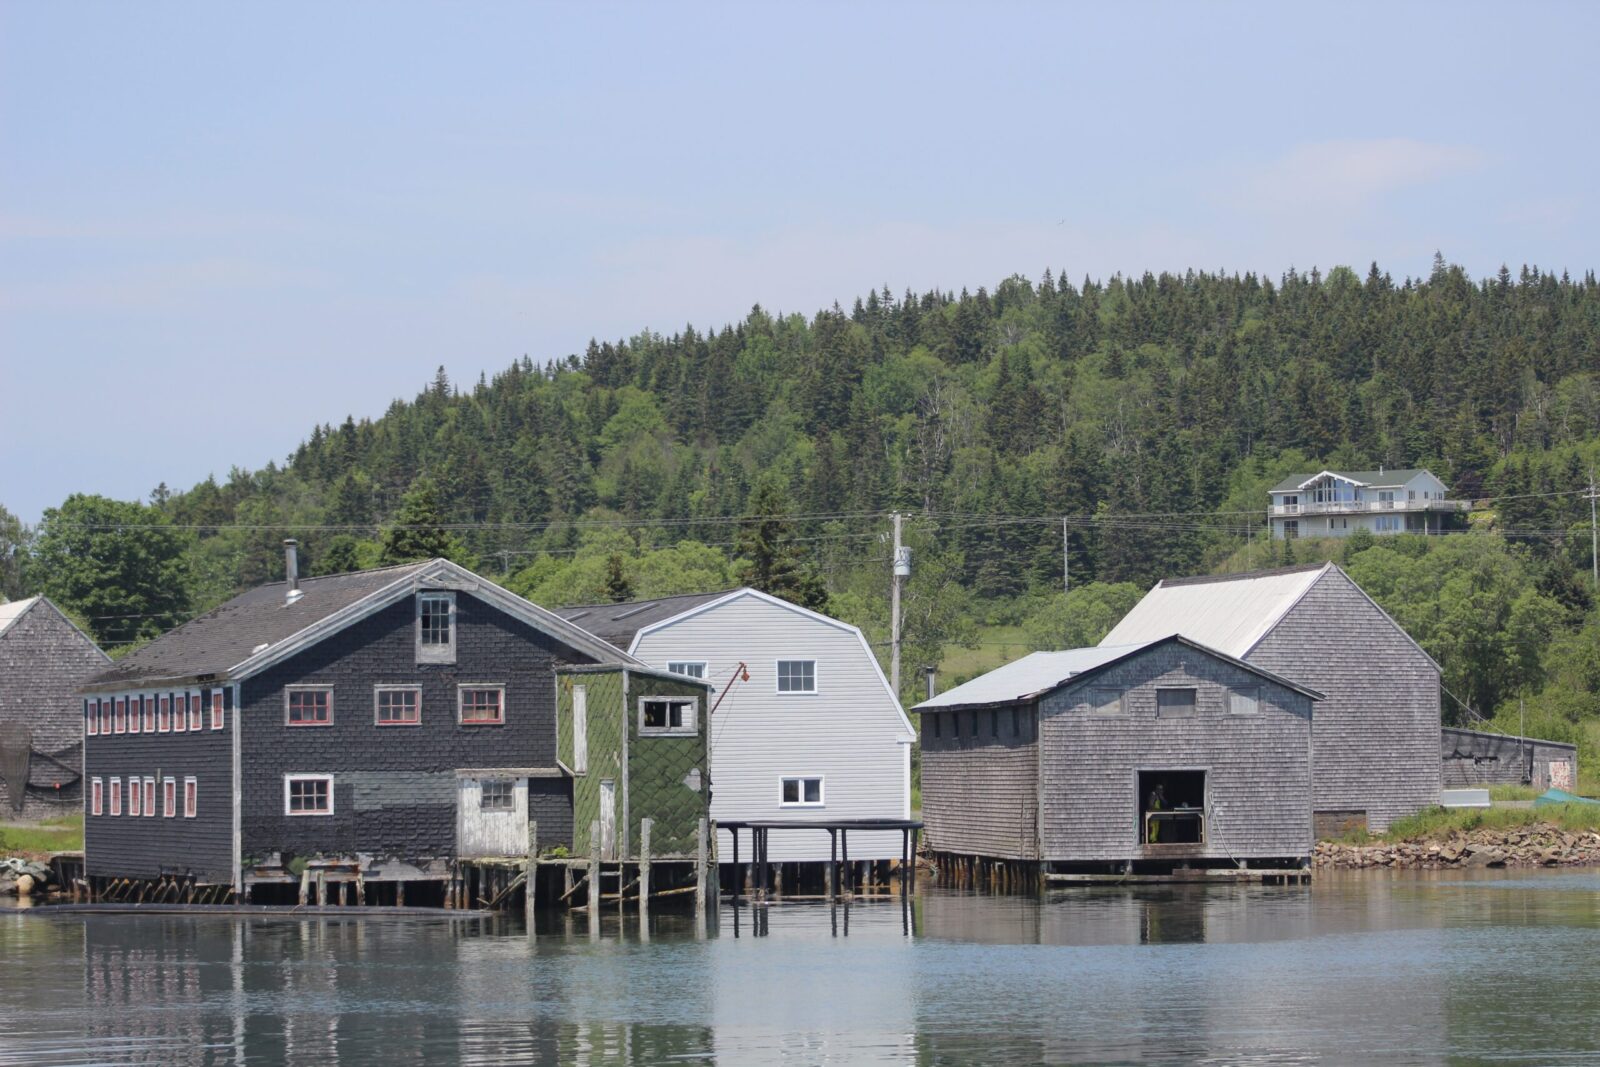 A group of houses on a dock near a body of water.